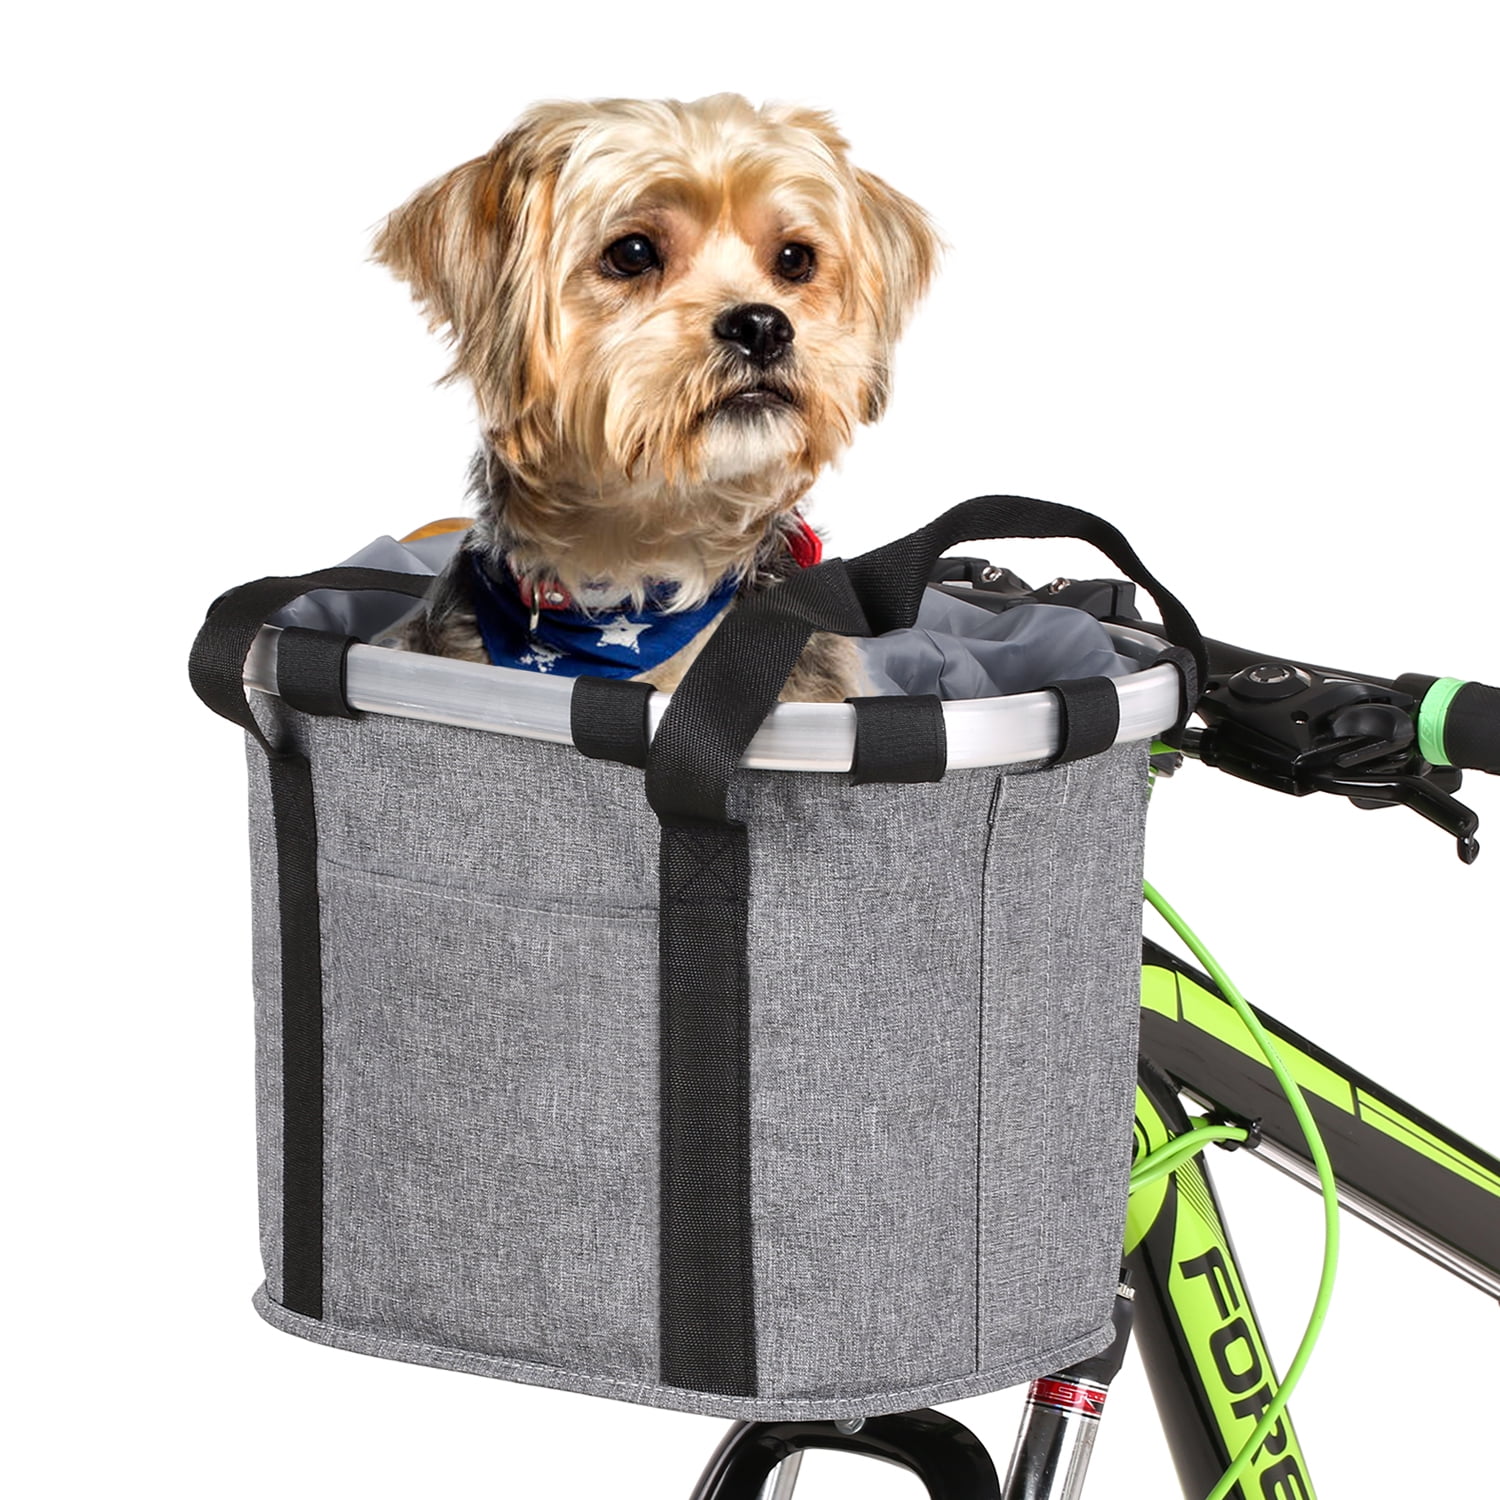 30x25x60cm Safety Pet Cat Dog Carrier Bike Basket Kids Bicycle Accessory Wicker Front Handlebar Bike Basket with Leather Straps and Metal Cover Bicycle Basket for Dogs 